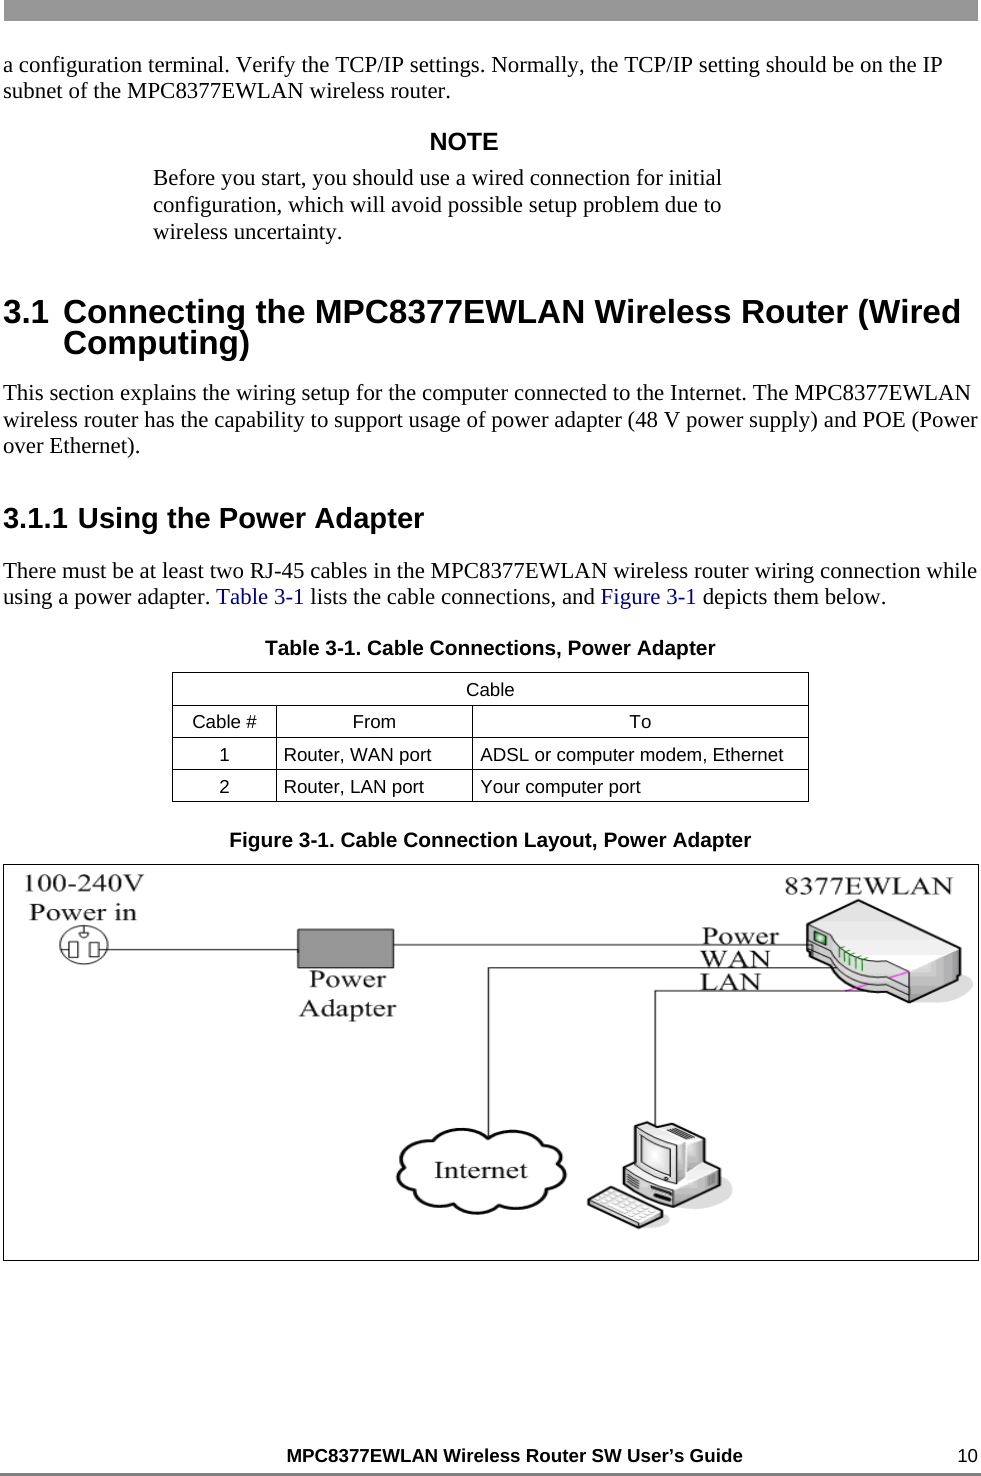                                                          MPC8377EWLAN Wireless Router SW User’s Guide    10 a configuration terminal. Verify the TCP/IP settings. Normally, the TCP/IP setting should be on the IP subnet of the MPC8377EWLAN wireless router. NOTE Before you start, you should use a wired connection for initial configuration, which will avoid possible setup problem due to wireless uncertainty. 3.1 Connecting the MPC8377EWLAN Wireless Router (Wired Computing) This section explains the wiring setup for the computer connected to the Internet. The MPC8377EWLAN wireless router has the capability to support usage of power adapter (48 V power supply) and POE (Power over Ethernet). 3.1.1 Using the Power Adapter There must be at least two RJ-45 cables in the MPC8377EWLAN wireless router wiring connection while using a power adapter. Table 3-1 lists the cable connections, and Figure 3-1 depicts them below. Table 3-1. Cable Connections, Power Adapter Cable Cable #  From  To 1  Router, WAN port  ADSL or computer modem, Ethernet 2  Router, LAN port  Your computer port Figure 3-1. Cable Connection Layout, Power Adapter  